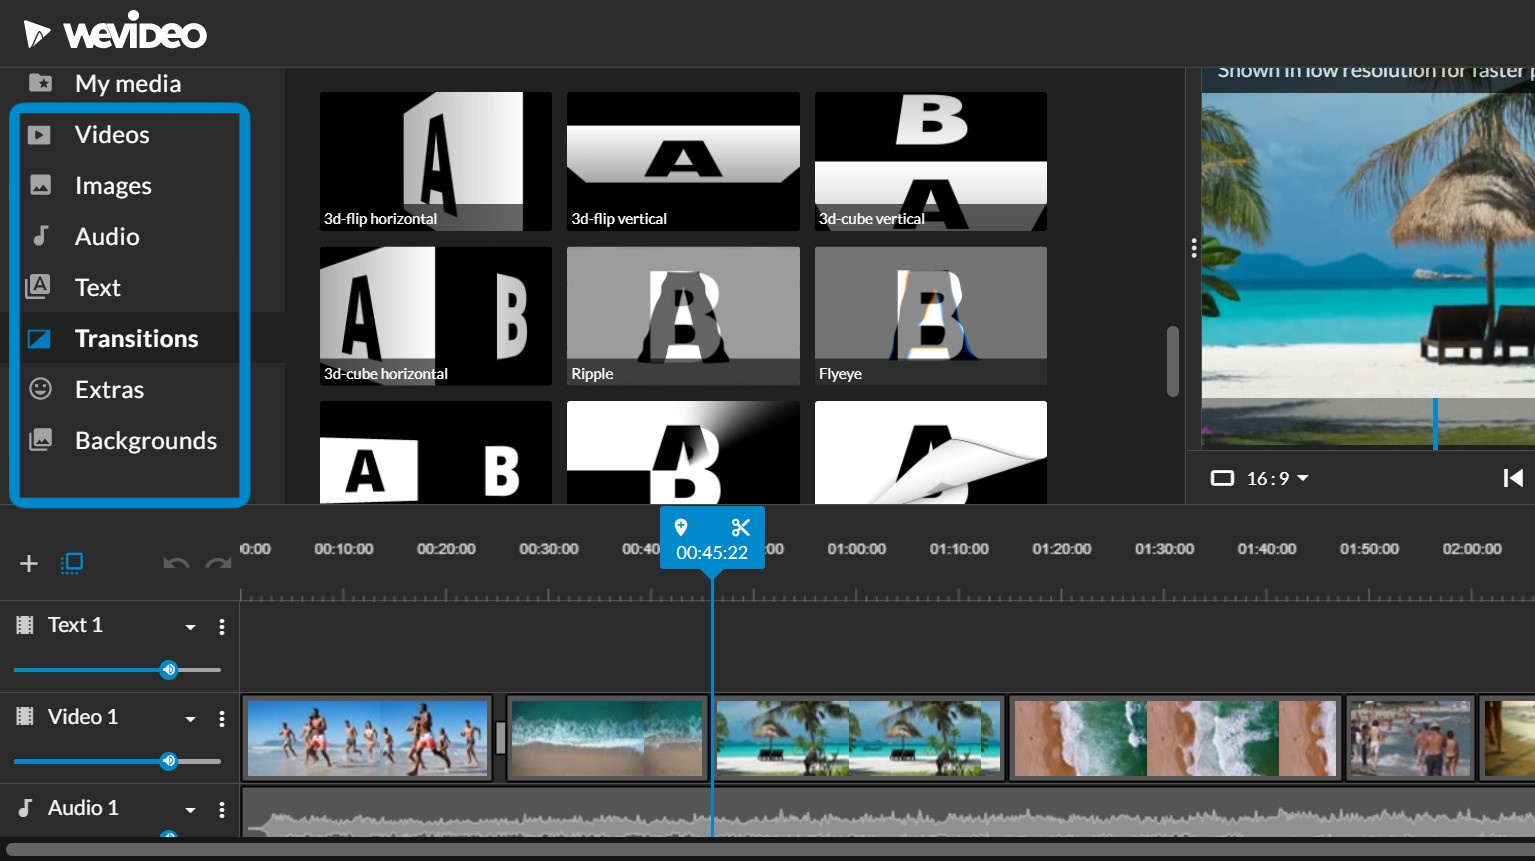 WeVideo web editor with blue rectangular outline highlighting tabs menu on left for customizing project. Tabs include: Videos, Images, Audio, Text, Transitions, Extras, and Backgrounds.